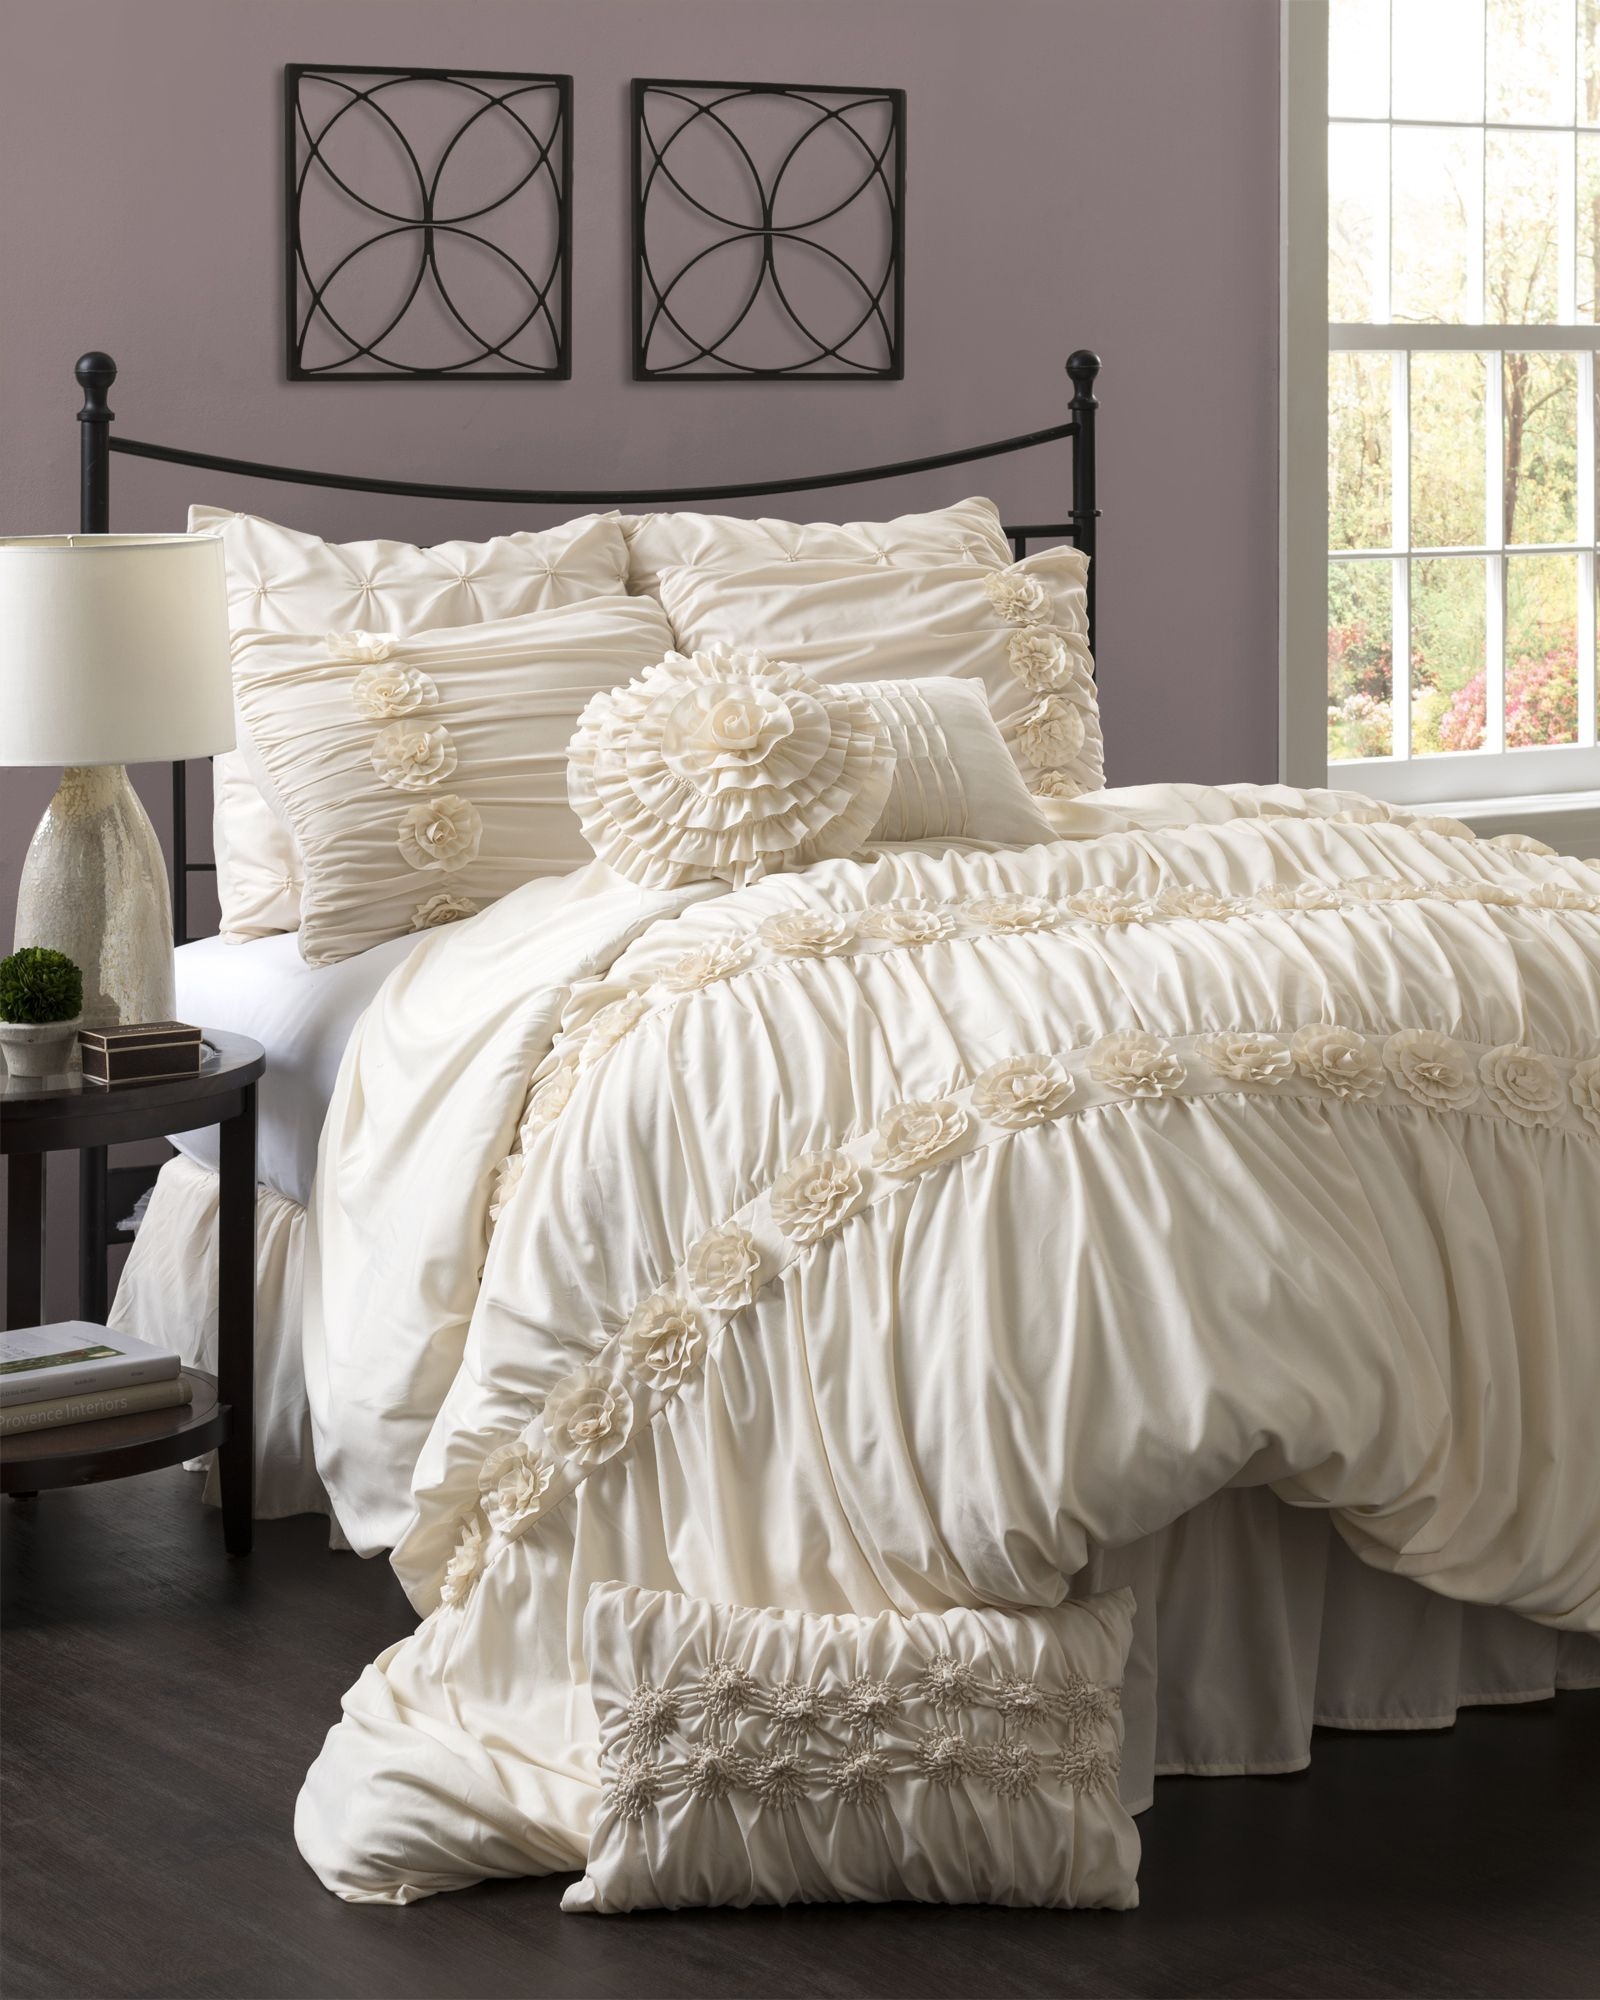 Air of romance to your master suite with this charming